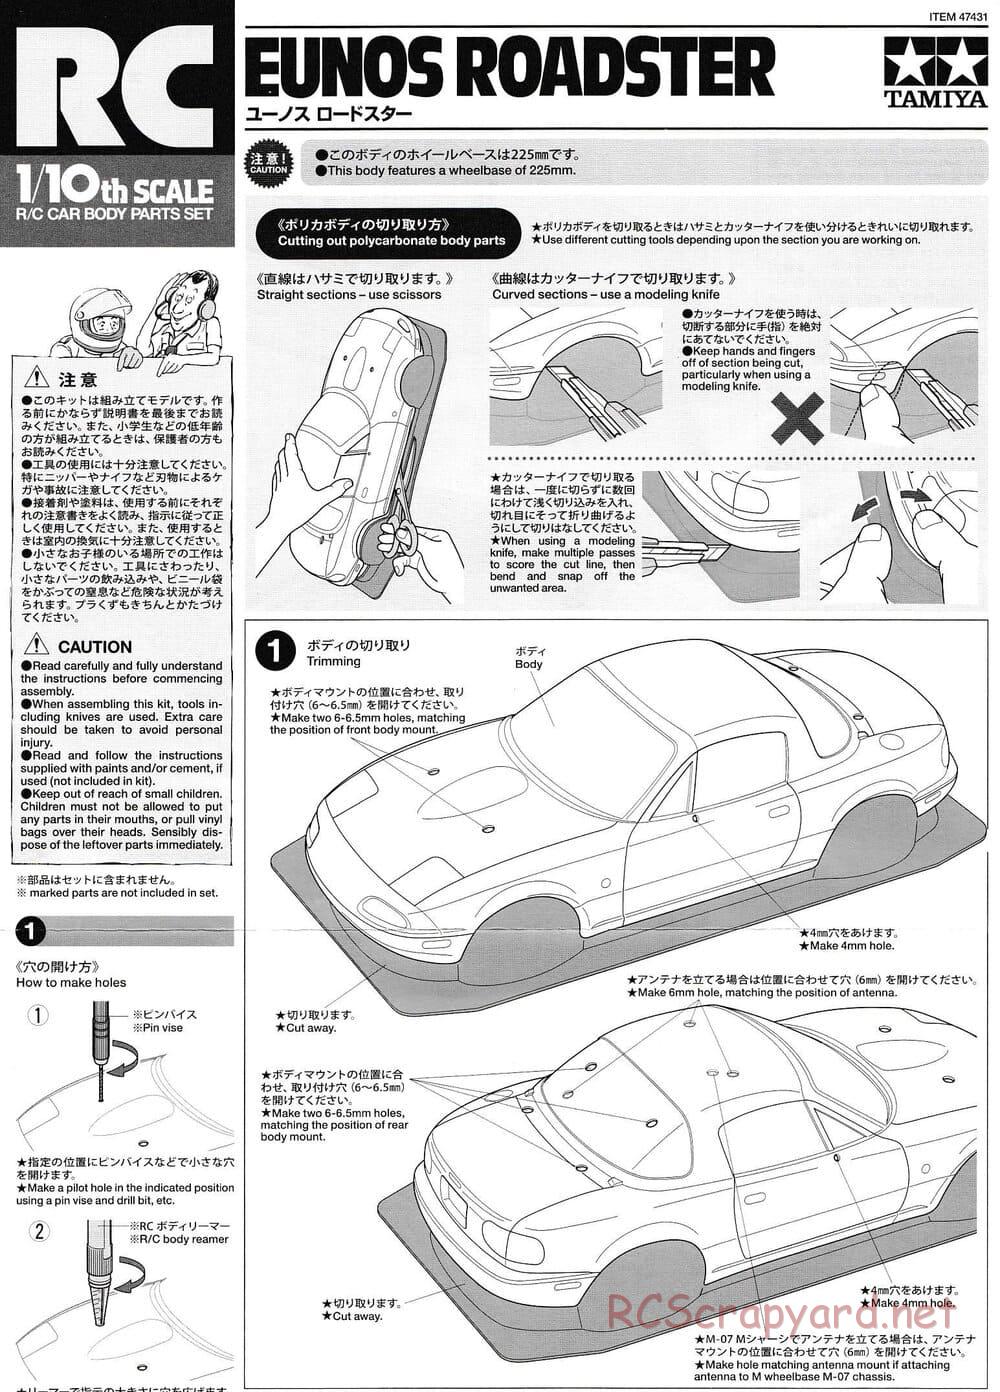 Tamiya - Eunos Roadster - M-06 Chassis - Body Manual - Page 1